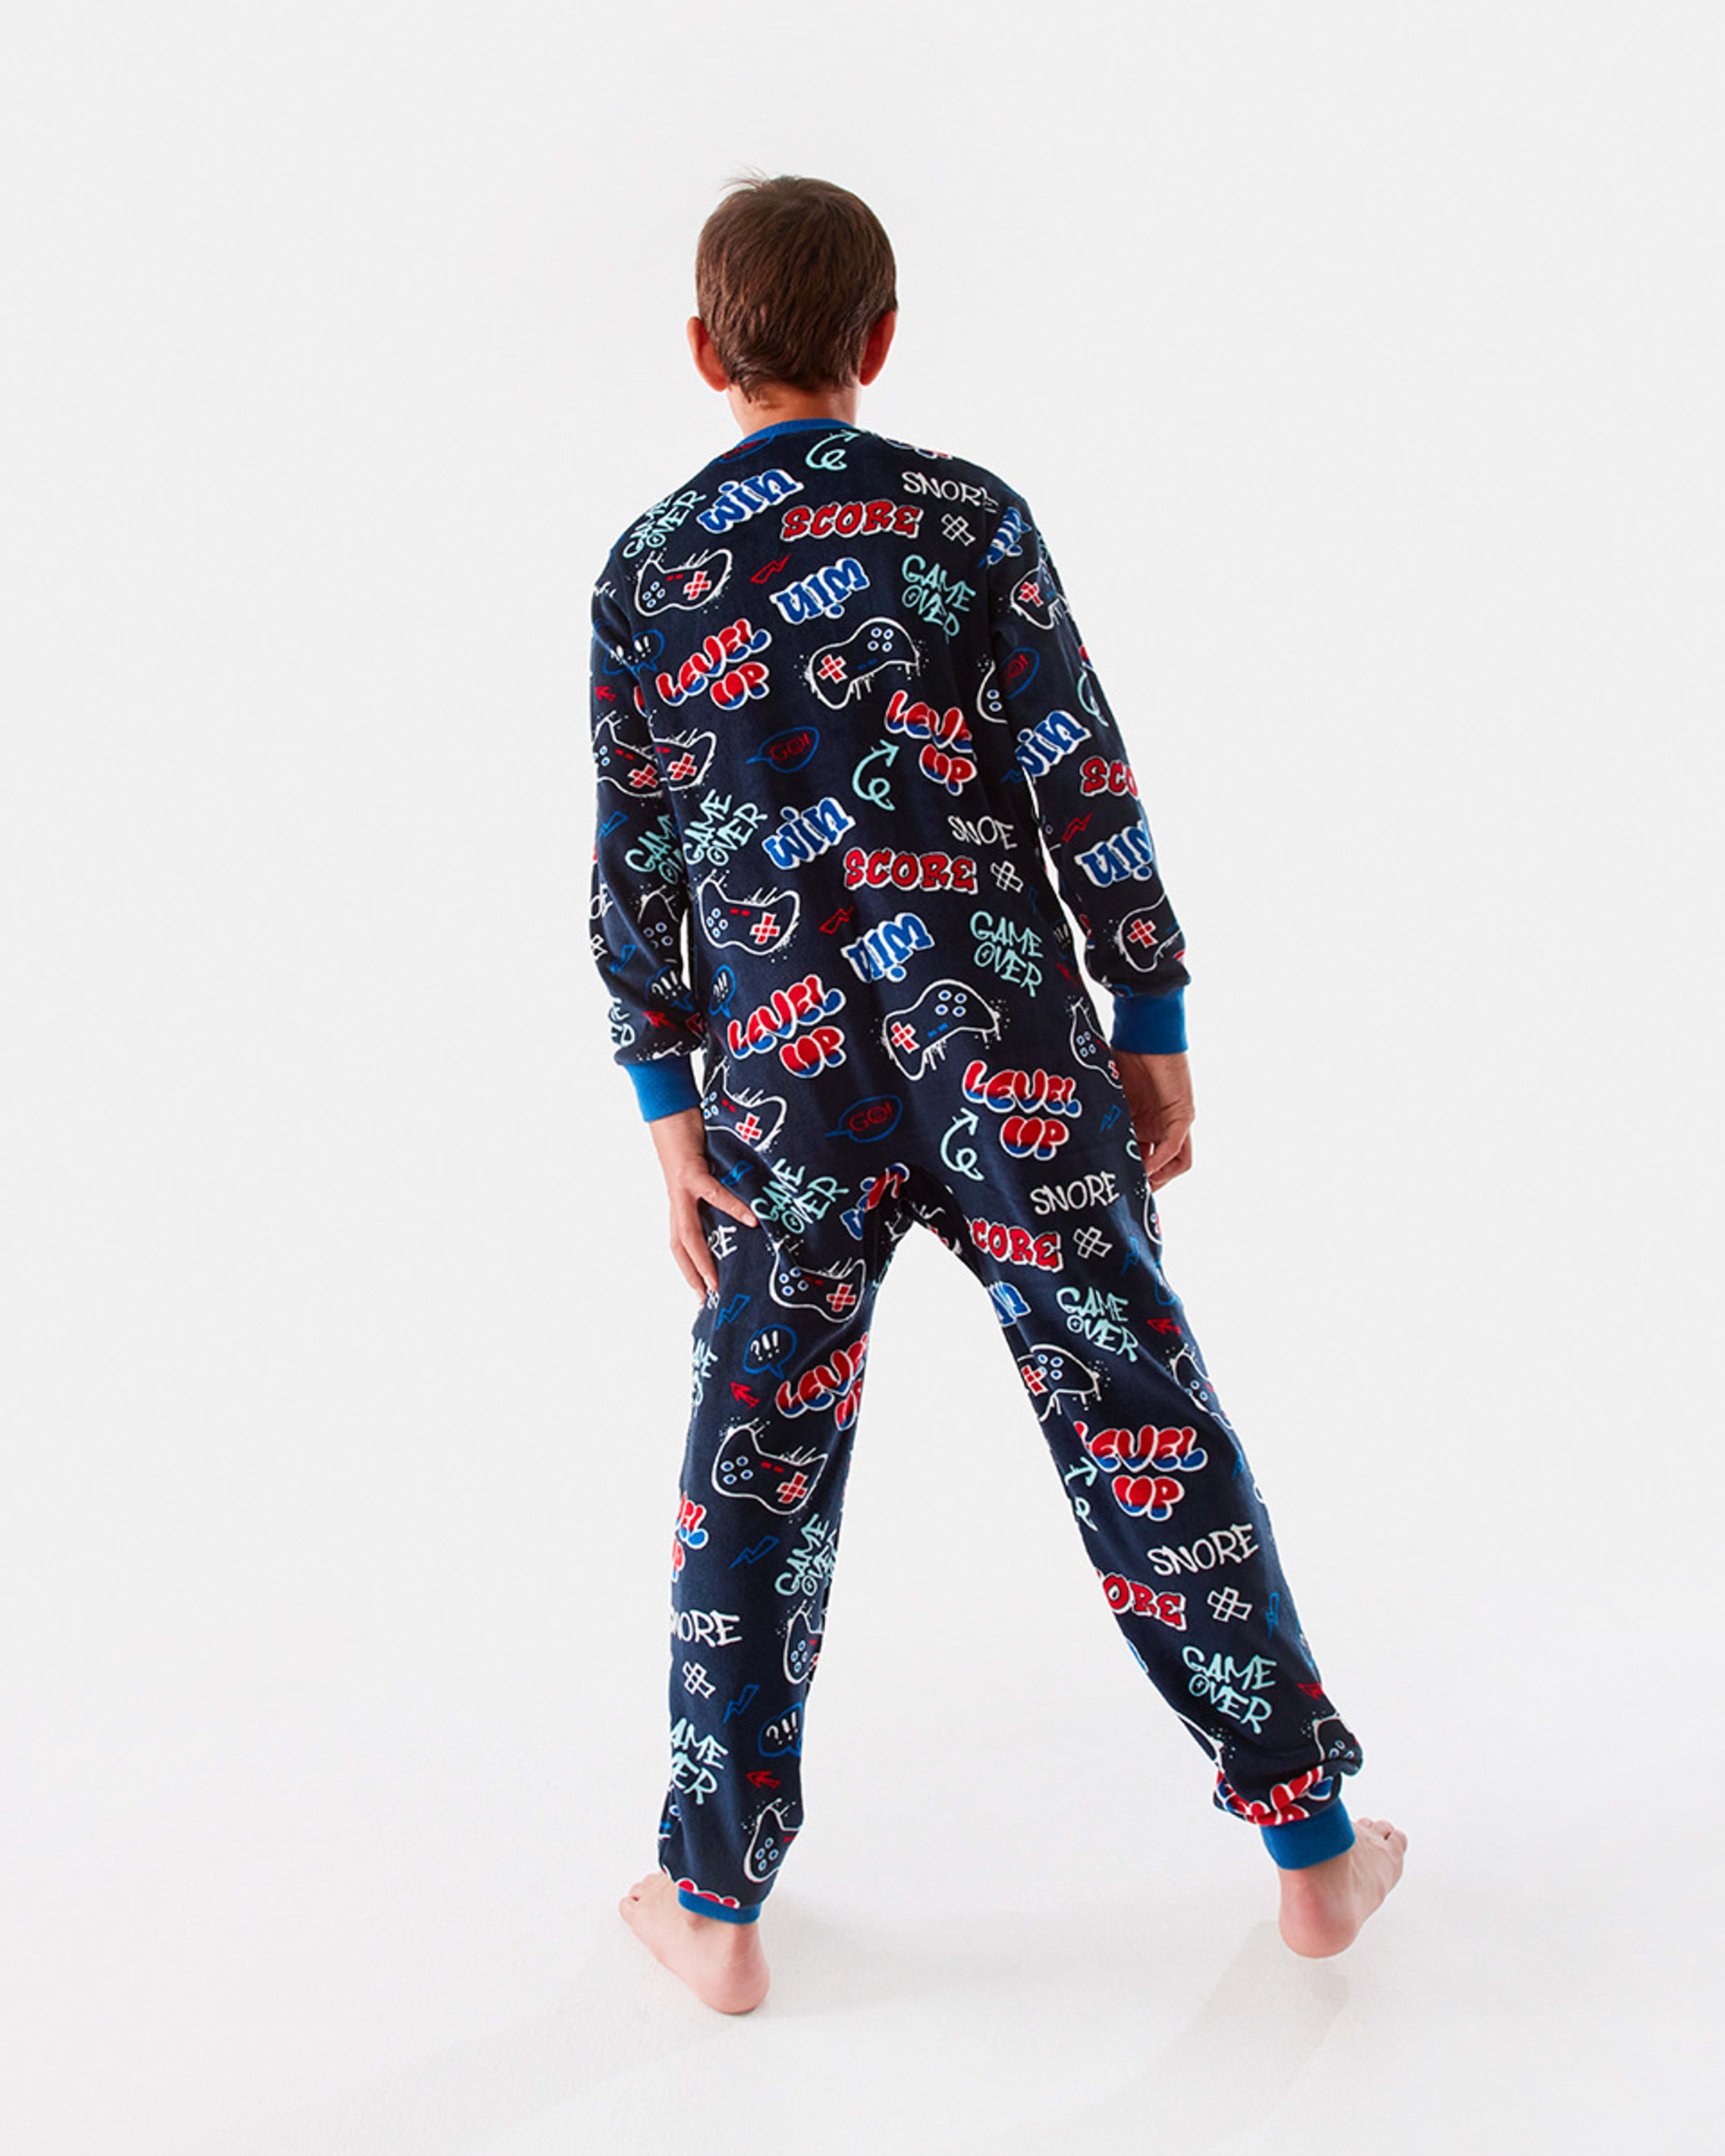 All-In-One Sleepsuit - Kmart